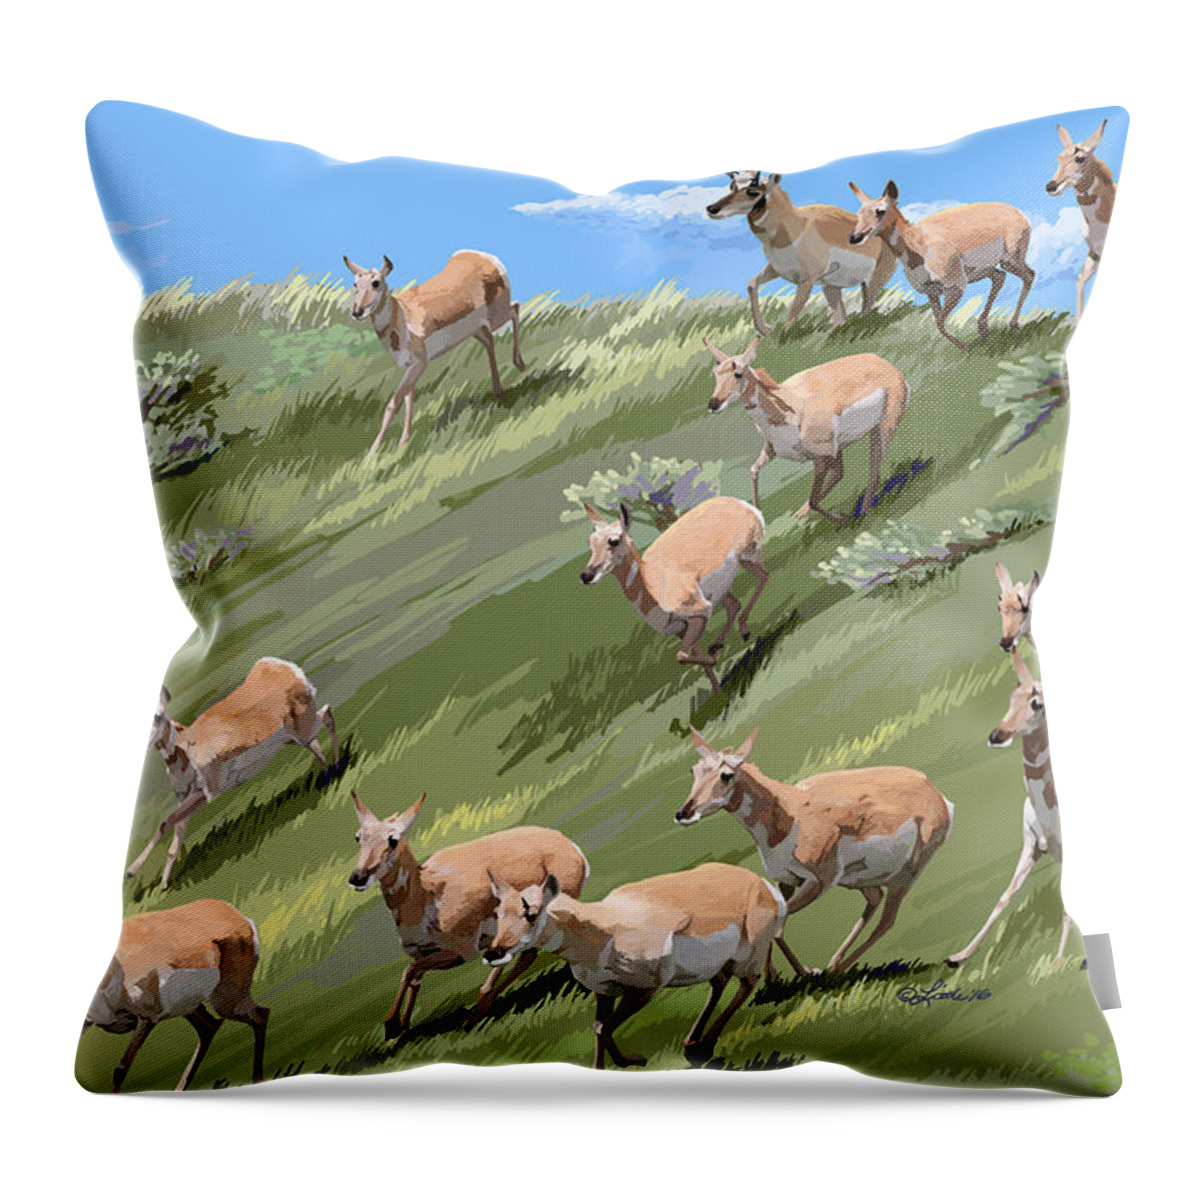 Animals Throw Pillow featuring the painting Pronghorn Promenade by Pam Little